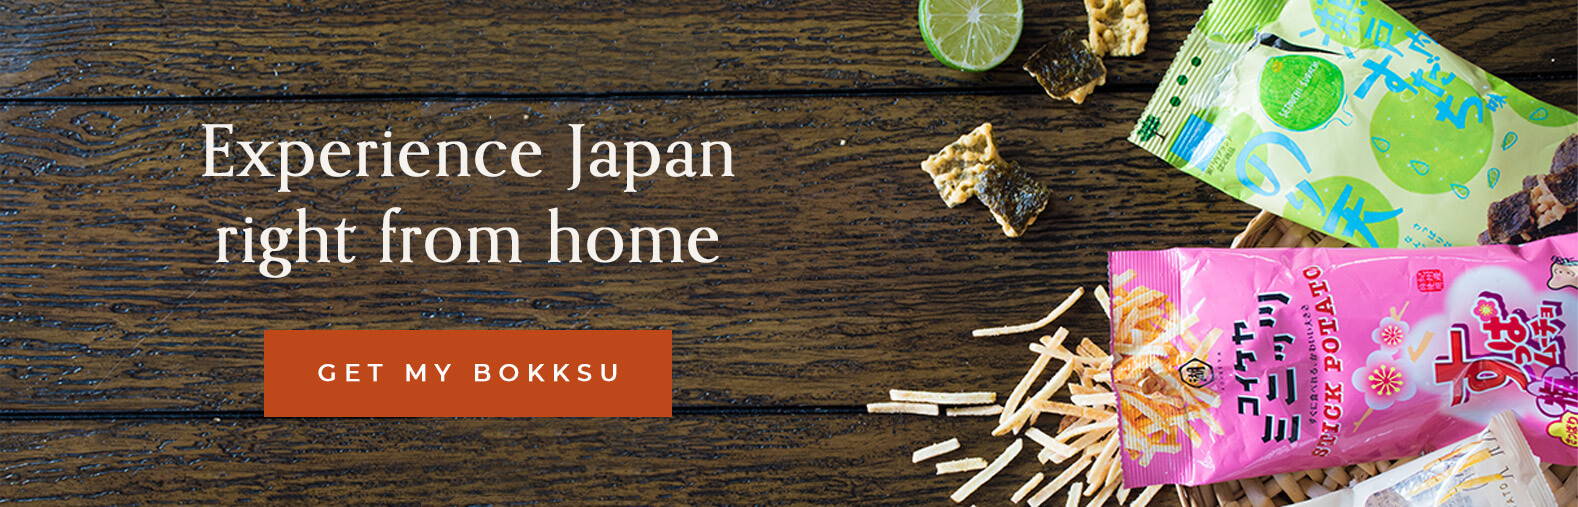 Experience Japan right from home